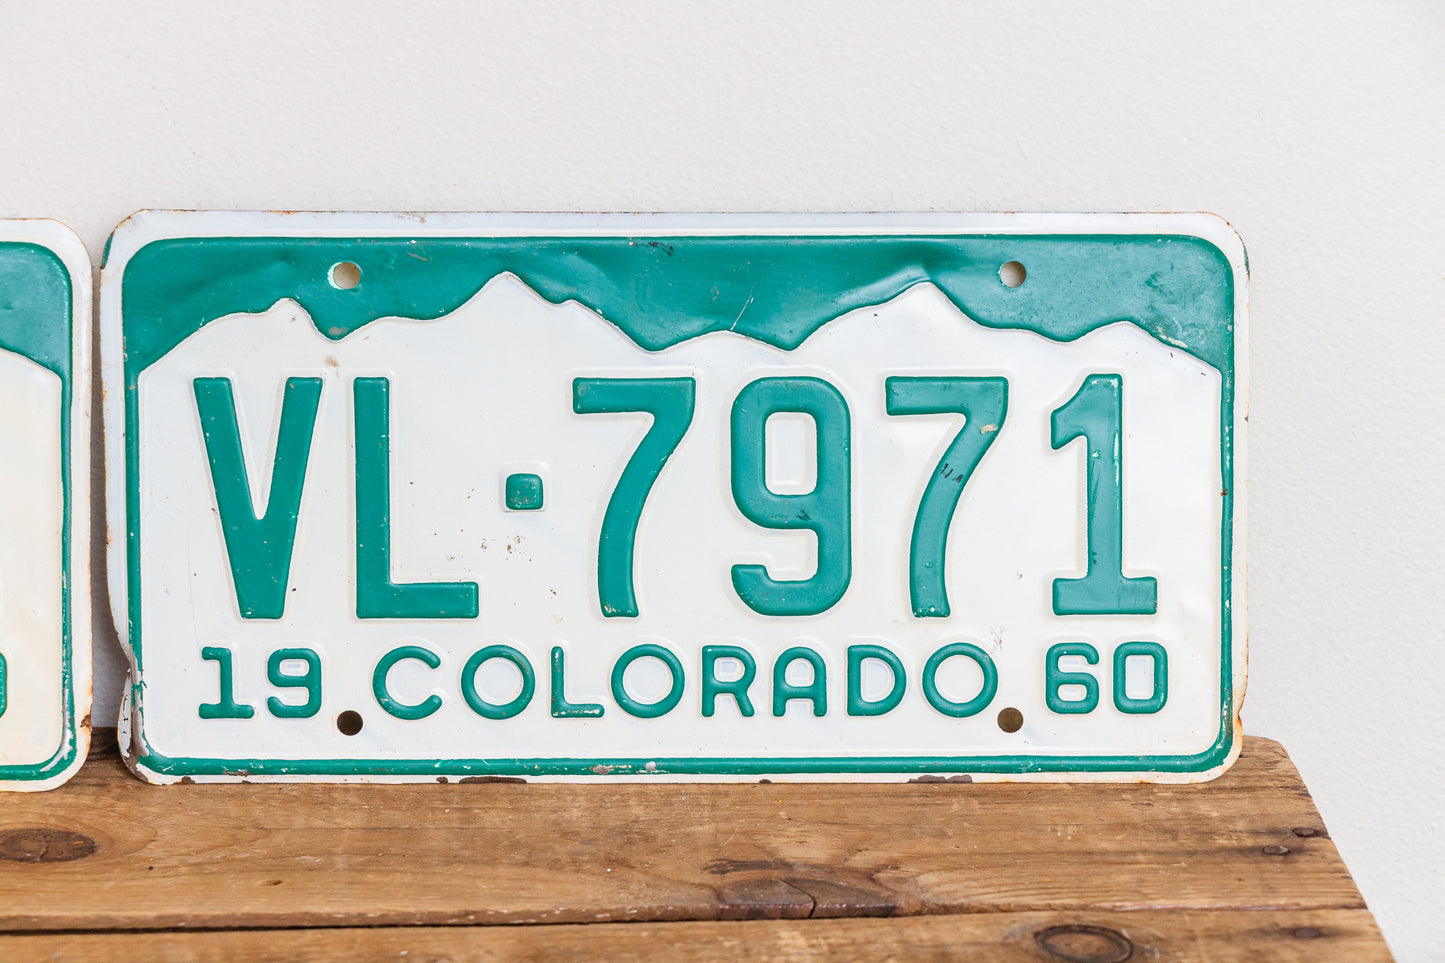 Colorado 1960 License Plate Pair Vintage White CO Wall Hanging Decor - Eagle's Eye Finds